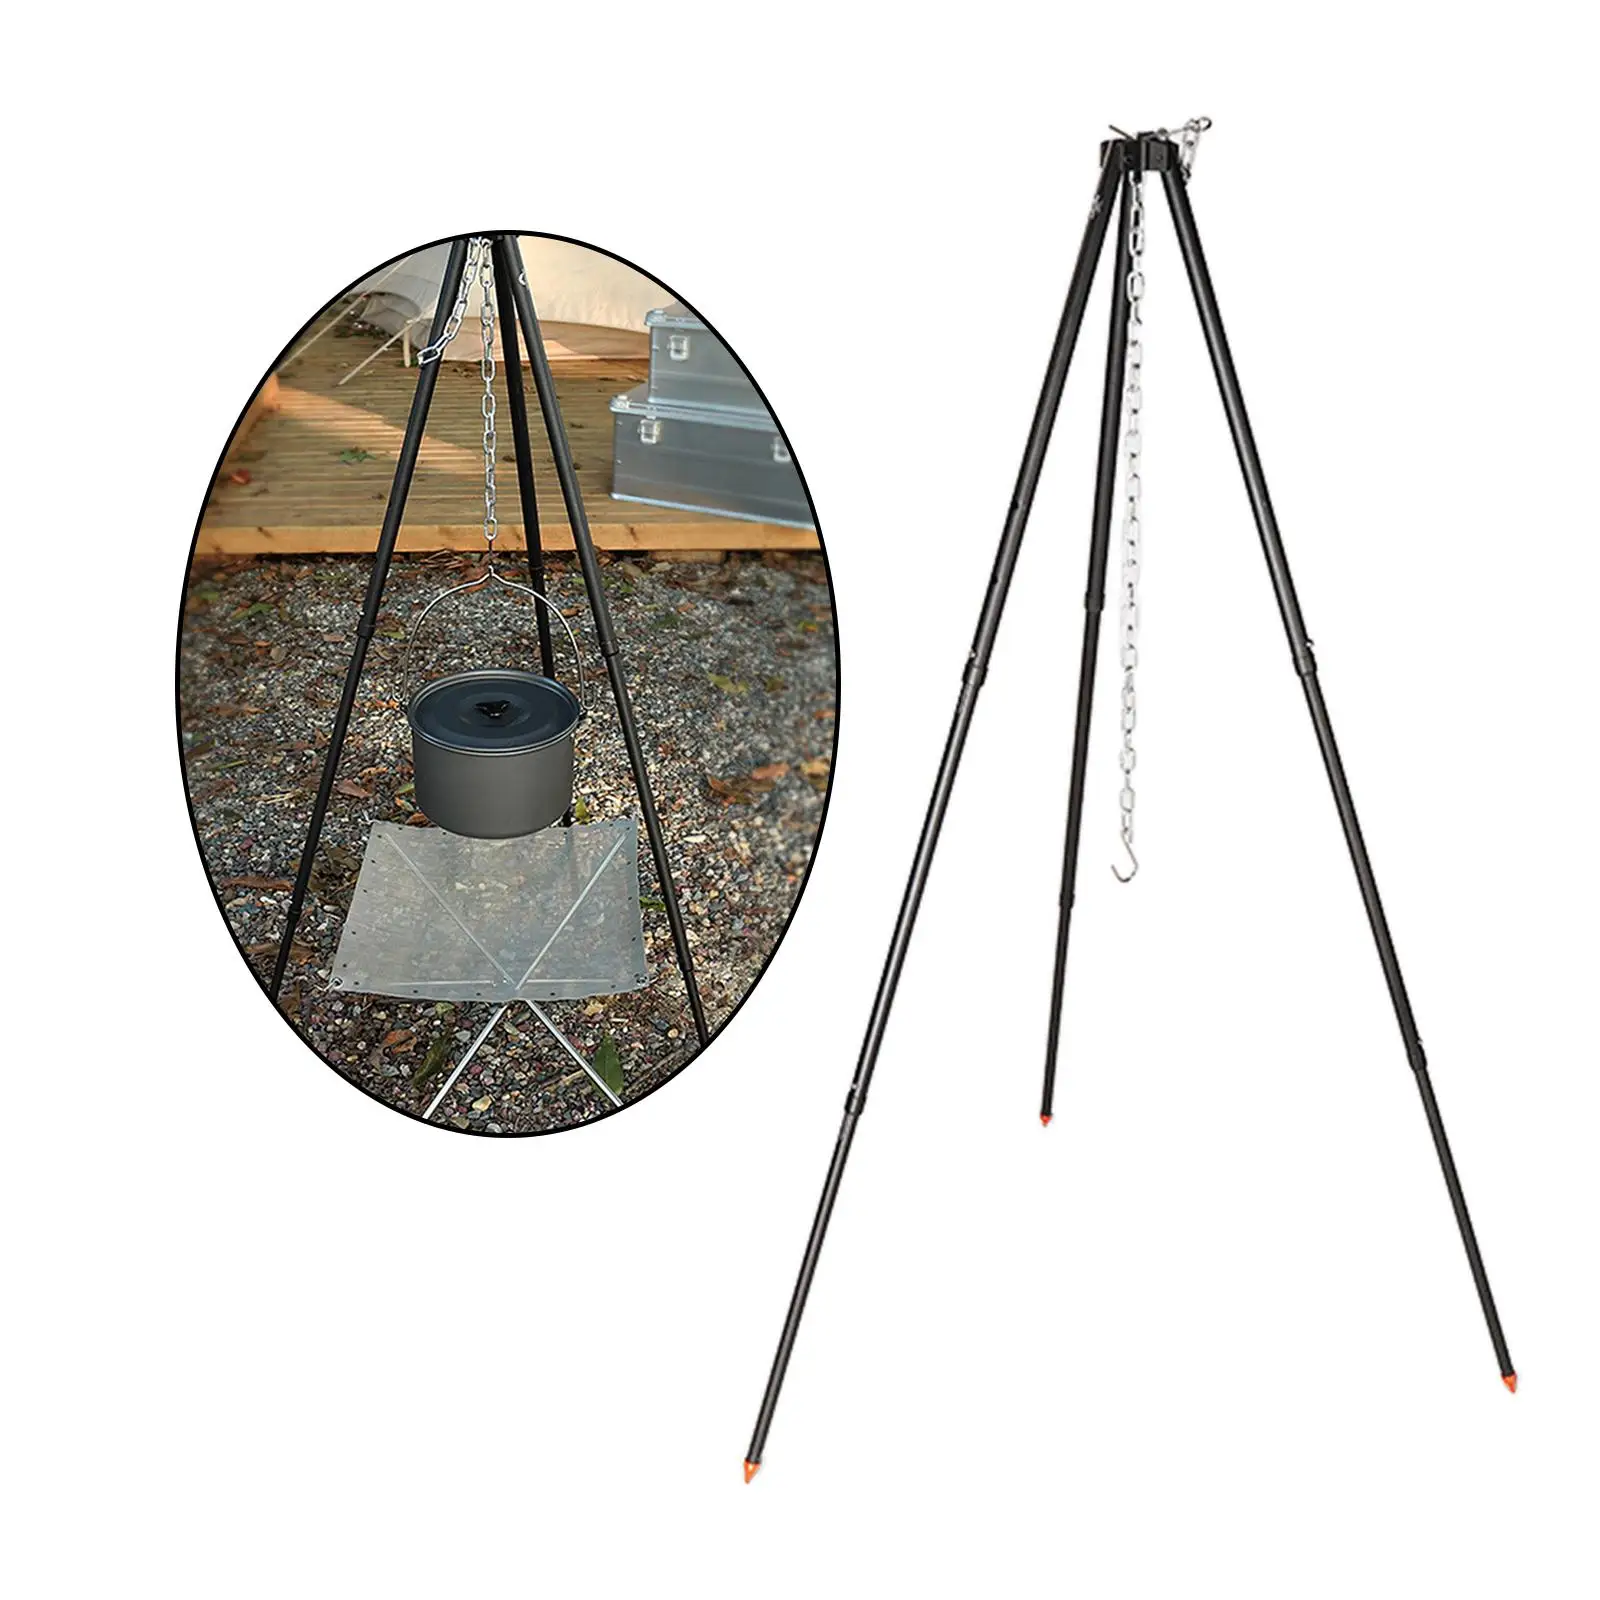 Pot Grill Durable Chain Campfire with Storage Bag Campfire Tripod for Cooking Grilling Set Camping Tripod for Outdoor Barbecue